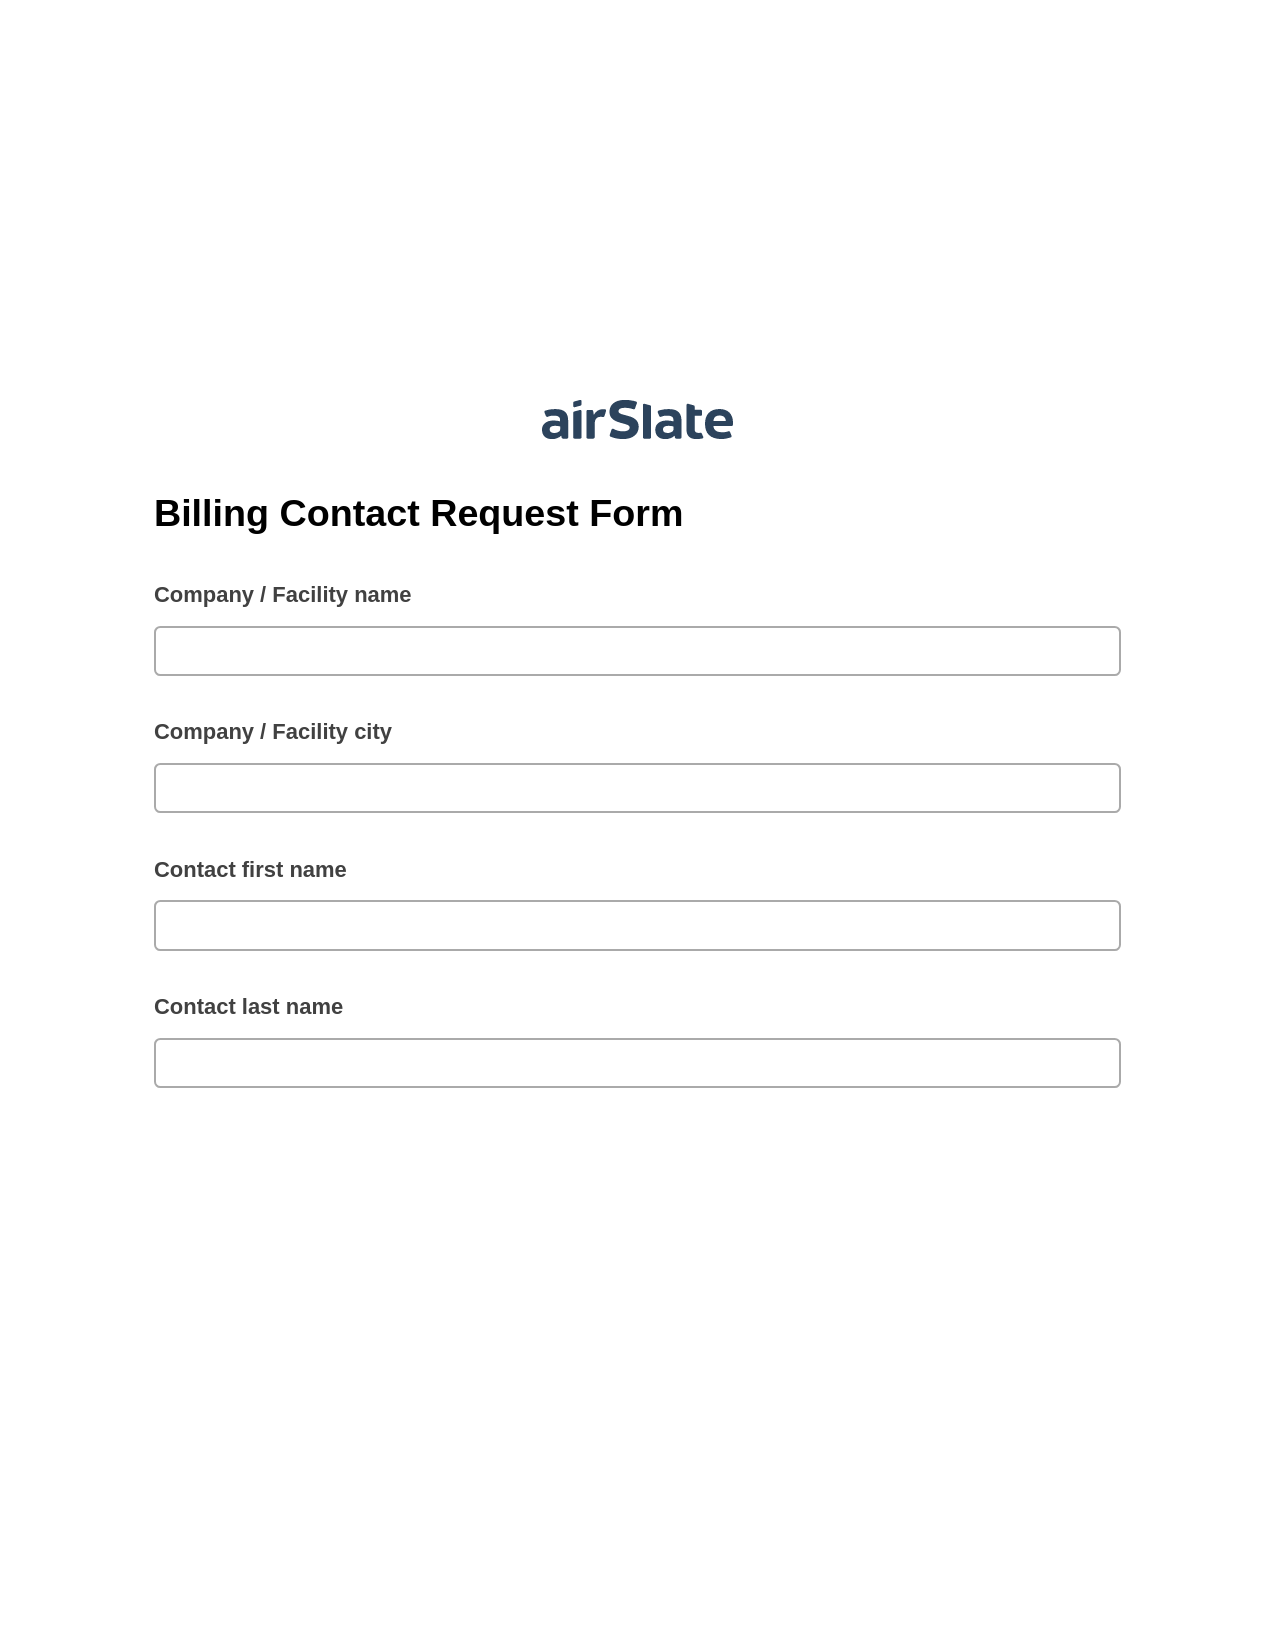 Billing Contact Request Form Pre-fill from Salesforce Record Bot, Roles Reminder Bot, Export to Salesforce Bot